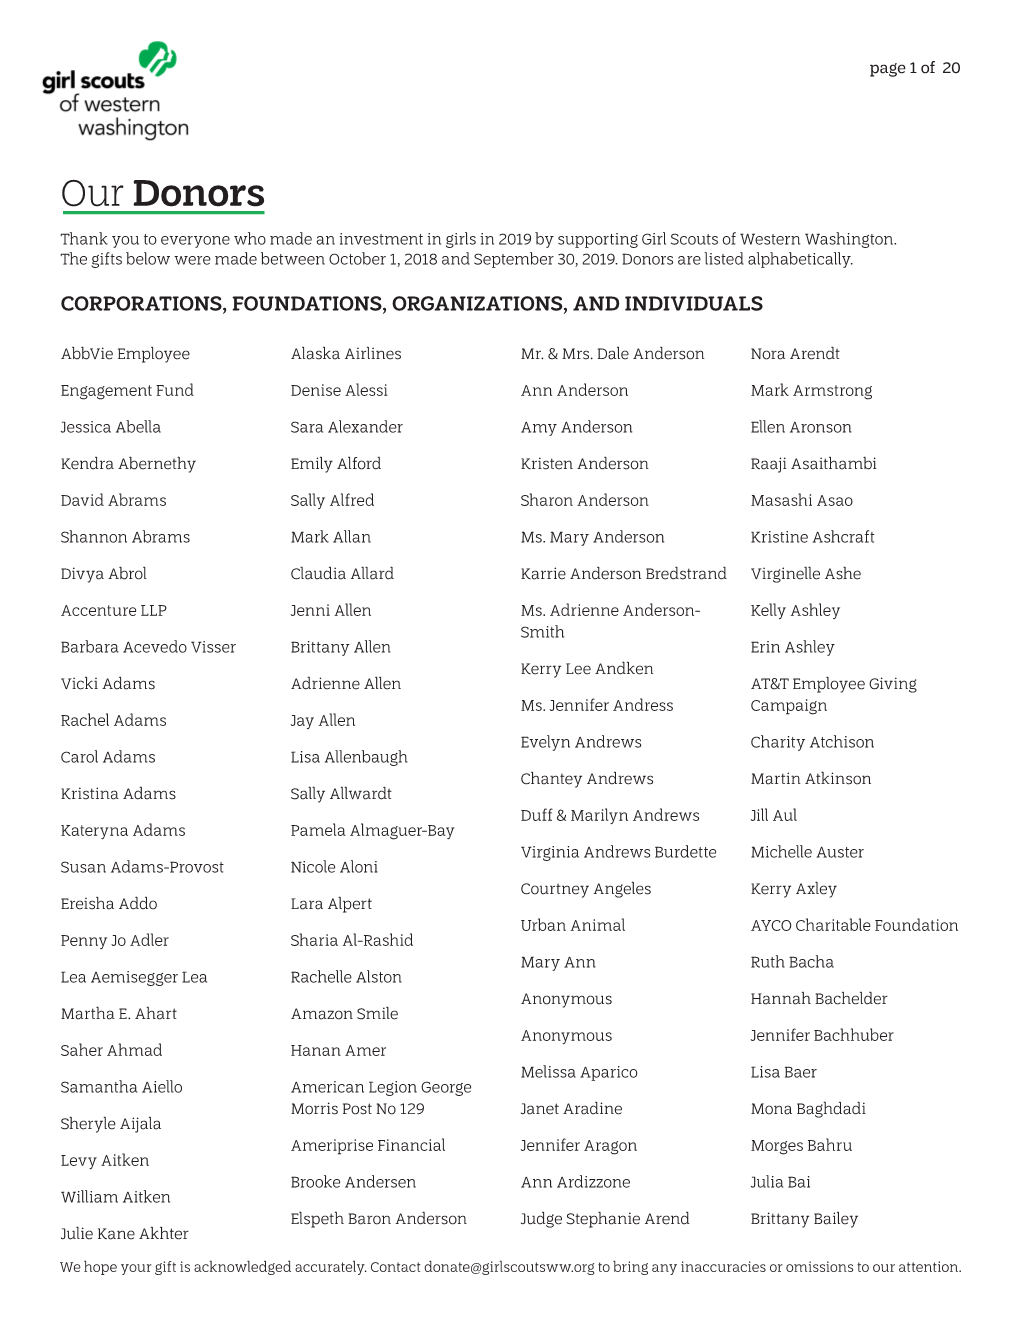 Our Donors Page 1 of 20 CORPORATIONS, FOUNDATIONS, ORGANIZATIONS, and INDIVIDUALS